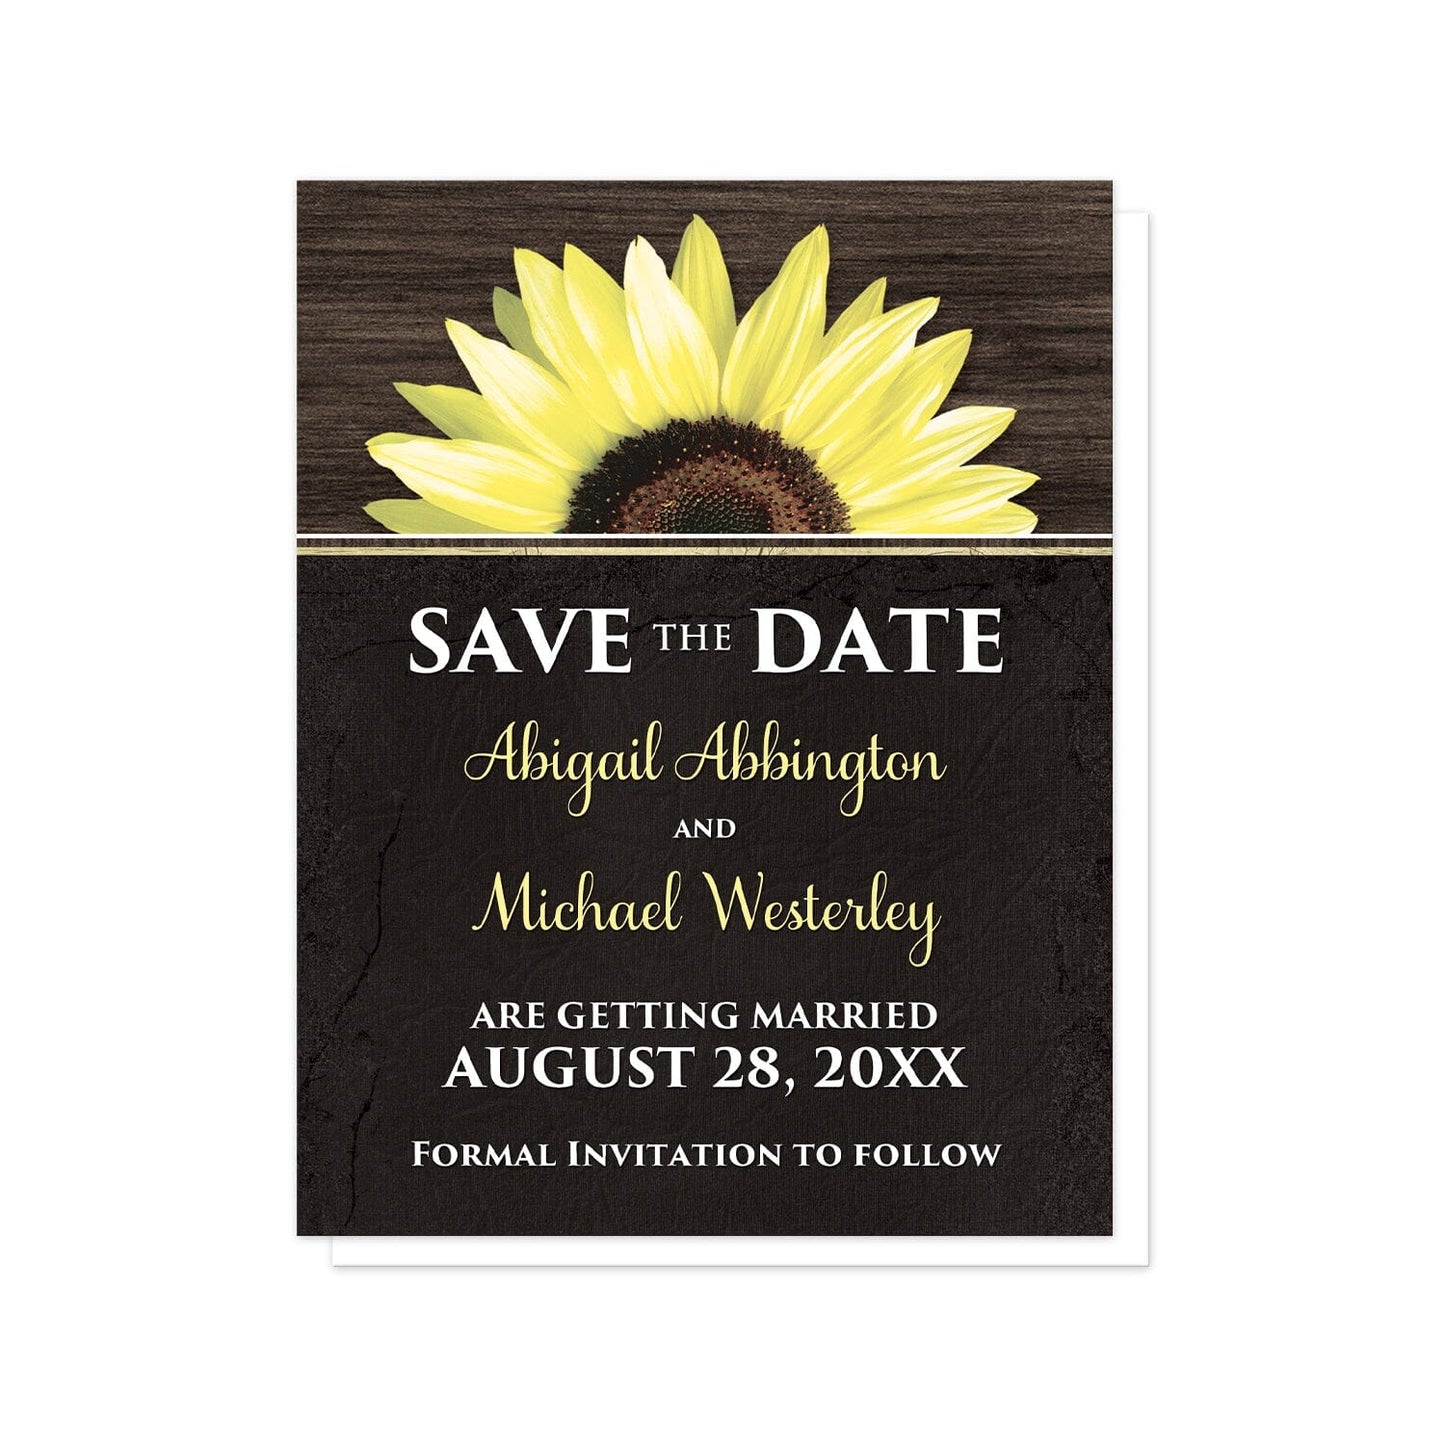 Rustic Sunflower with Black Save the Date Cards at Artistically Invited. Country-inspired rustic sunflower with black save the date cards featuring a vibrant bright yellow sunflower over a textured dark brown wood design along the top. Your personalized wedding date details are custom printed in yellow and white over a tattered black cloth illustration below the sunflower.